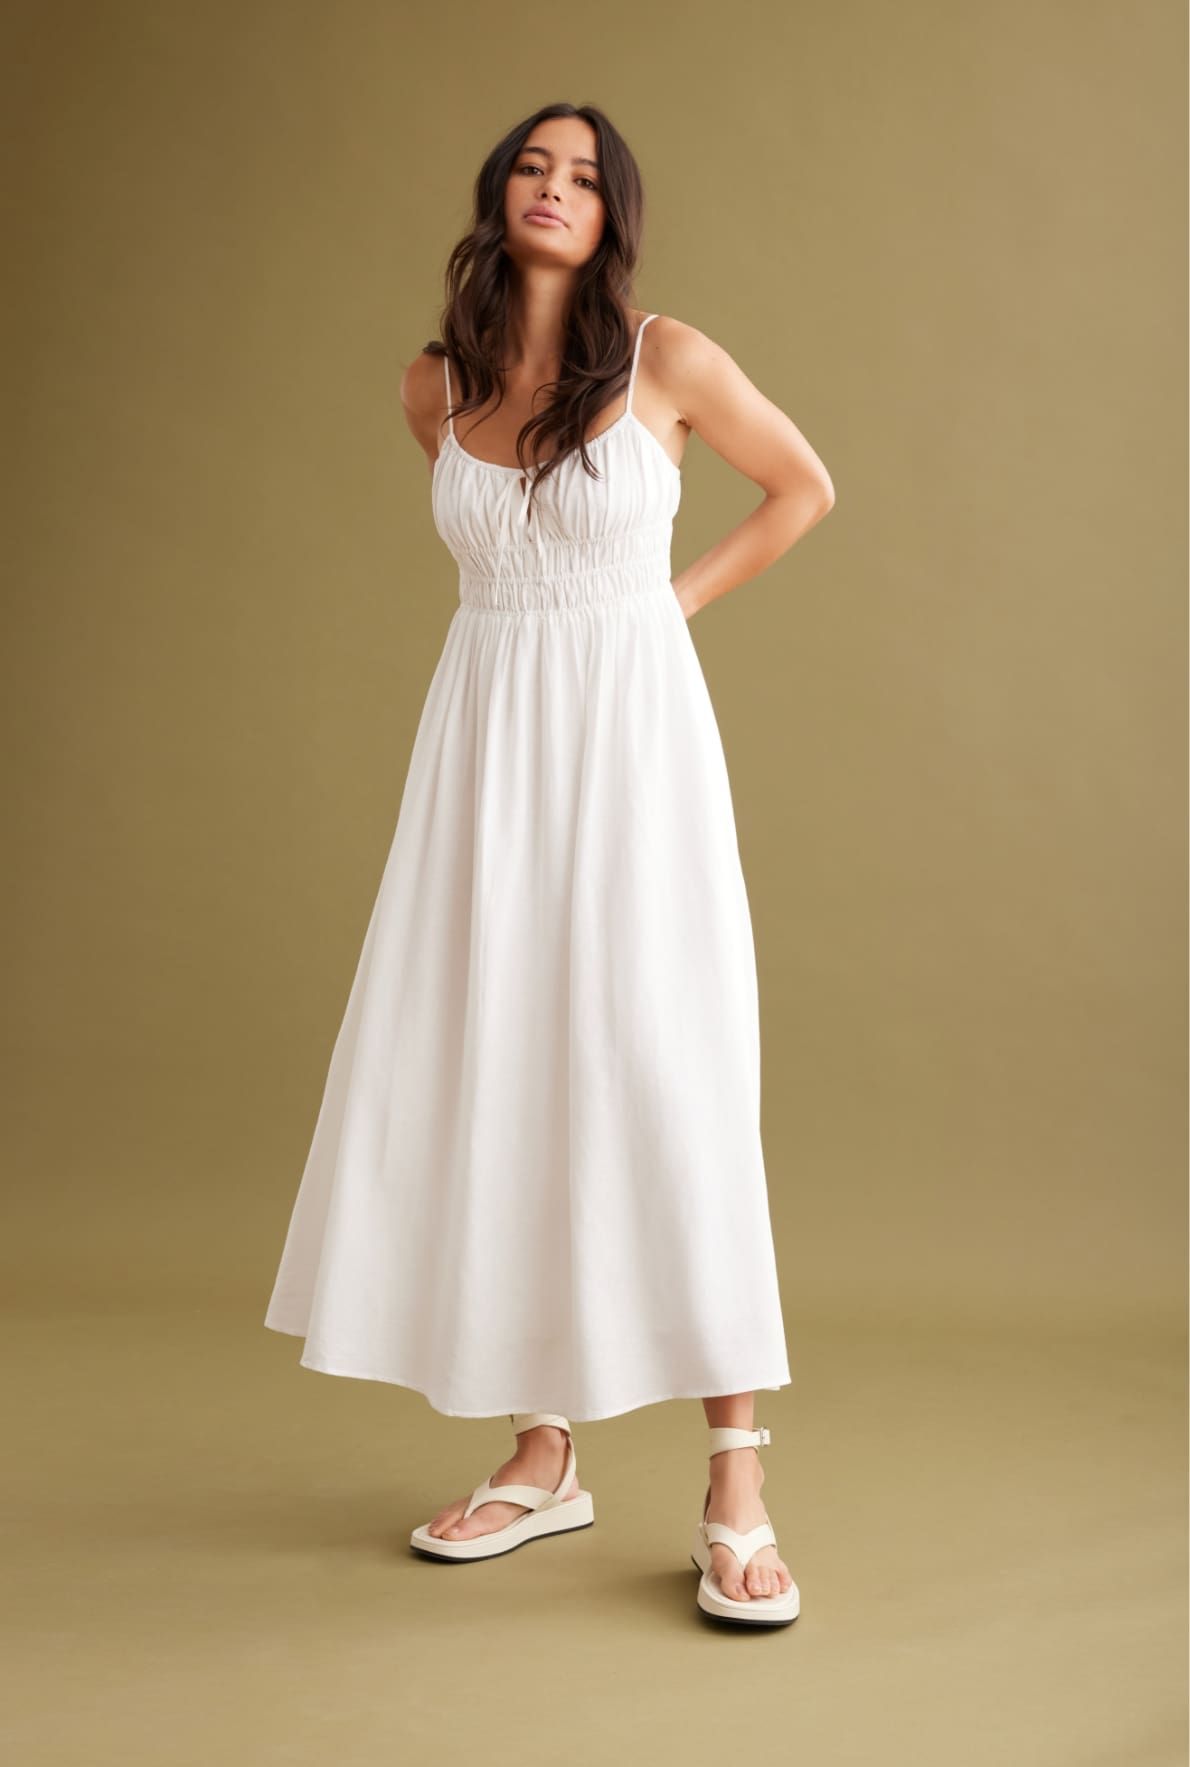 A model wears a white maxi linen dress with a ruched bust